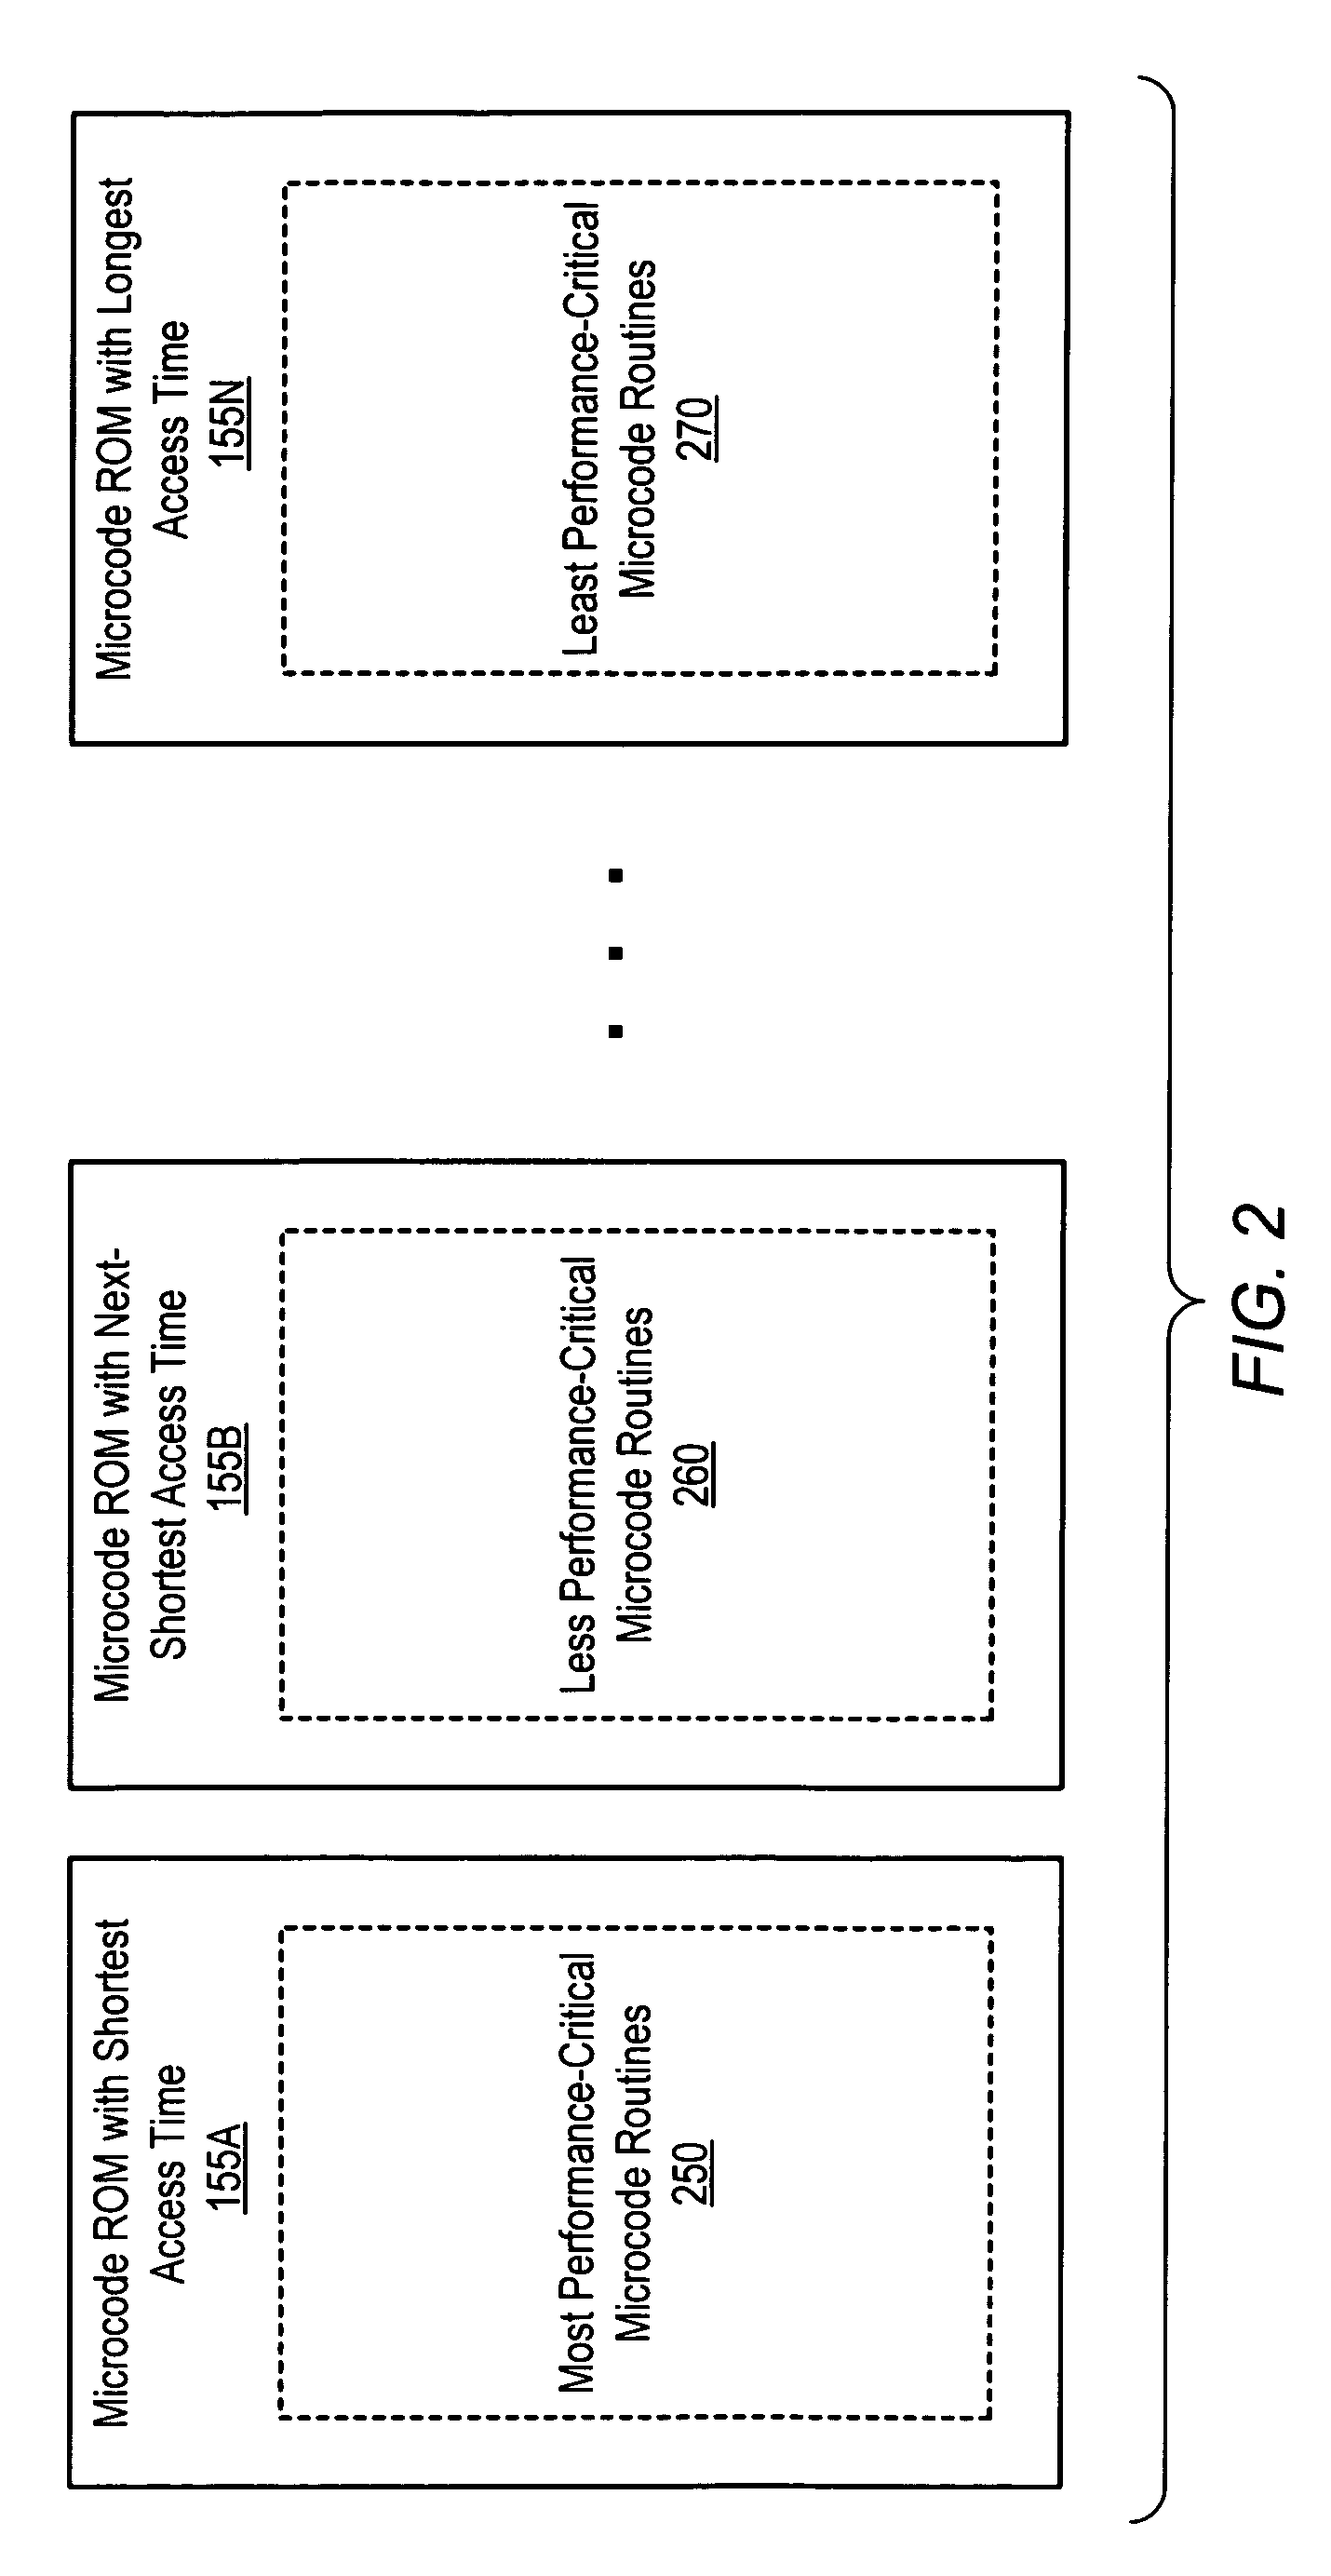 Integrated circuit with multiple microcode ROMs